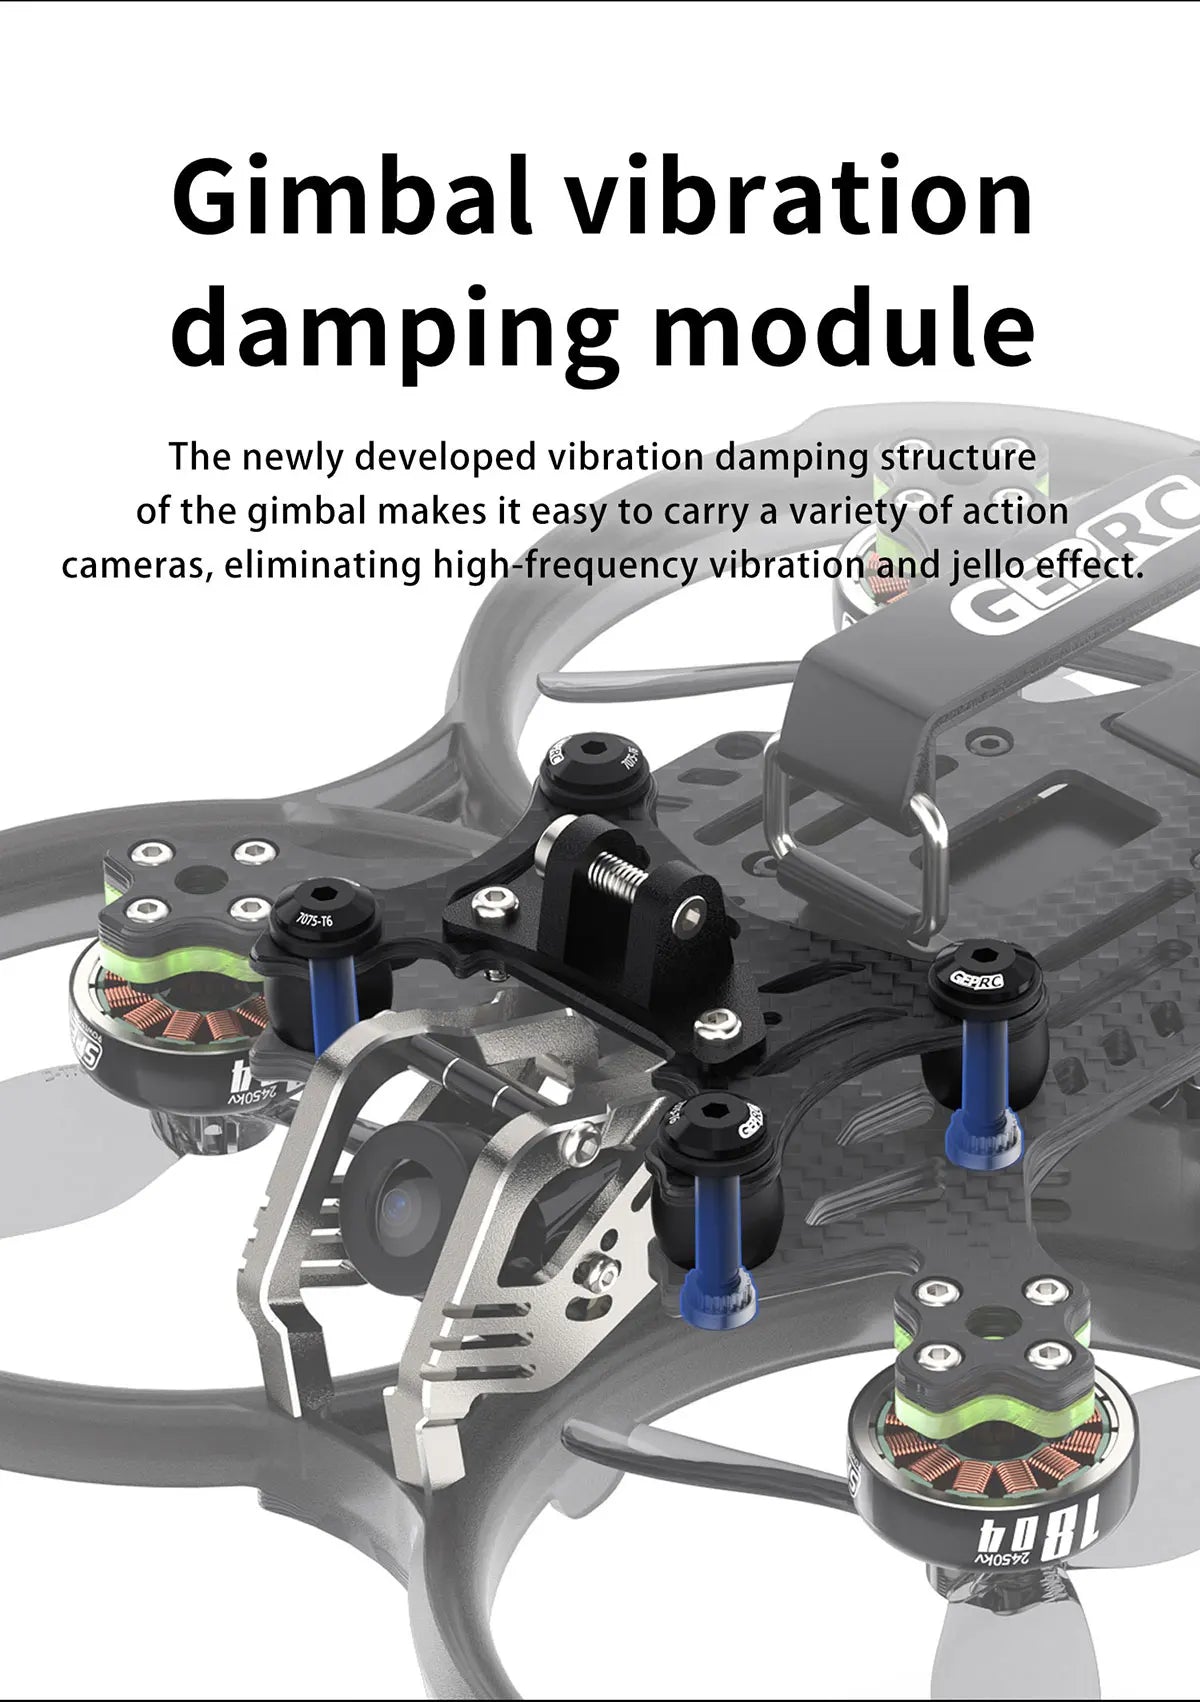 GEPRC Cinebot 30 FPV Drone, gimbal's vibration damping structure eliminates high-frequency vibration and j